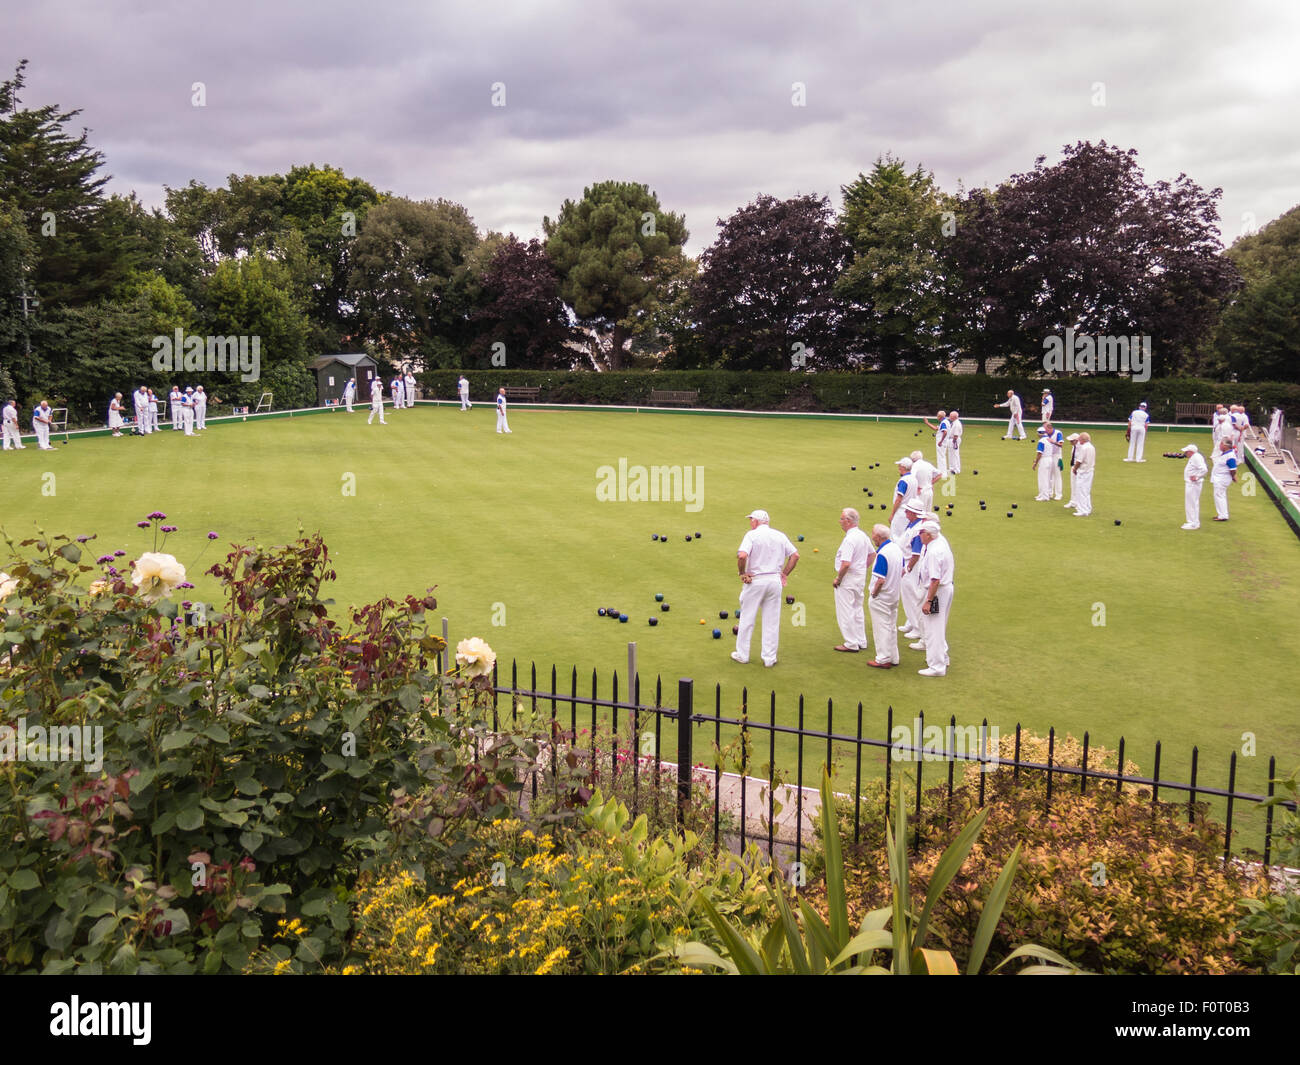 Whitstable, UK, 20th August 2015. Whitstable bowling club hosts a competition with Gravesend Men's Veterans.  Viewed from the free entry public gardens of Whitstable Castle. Bowls have been played here for 75 years. Stock Photo